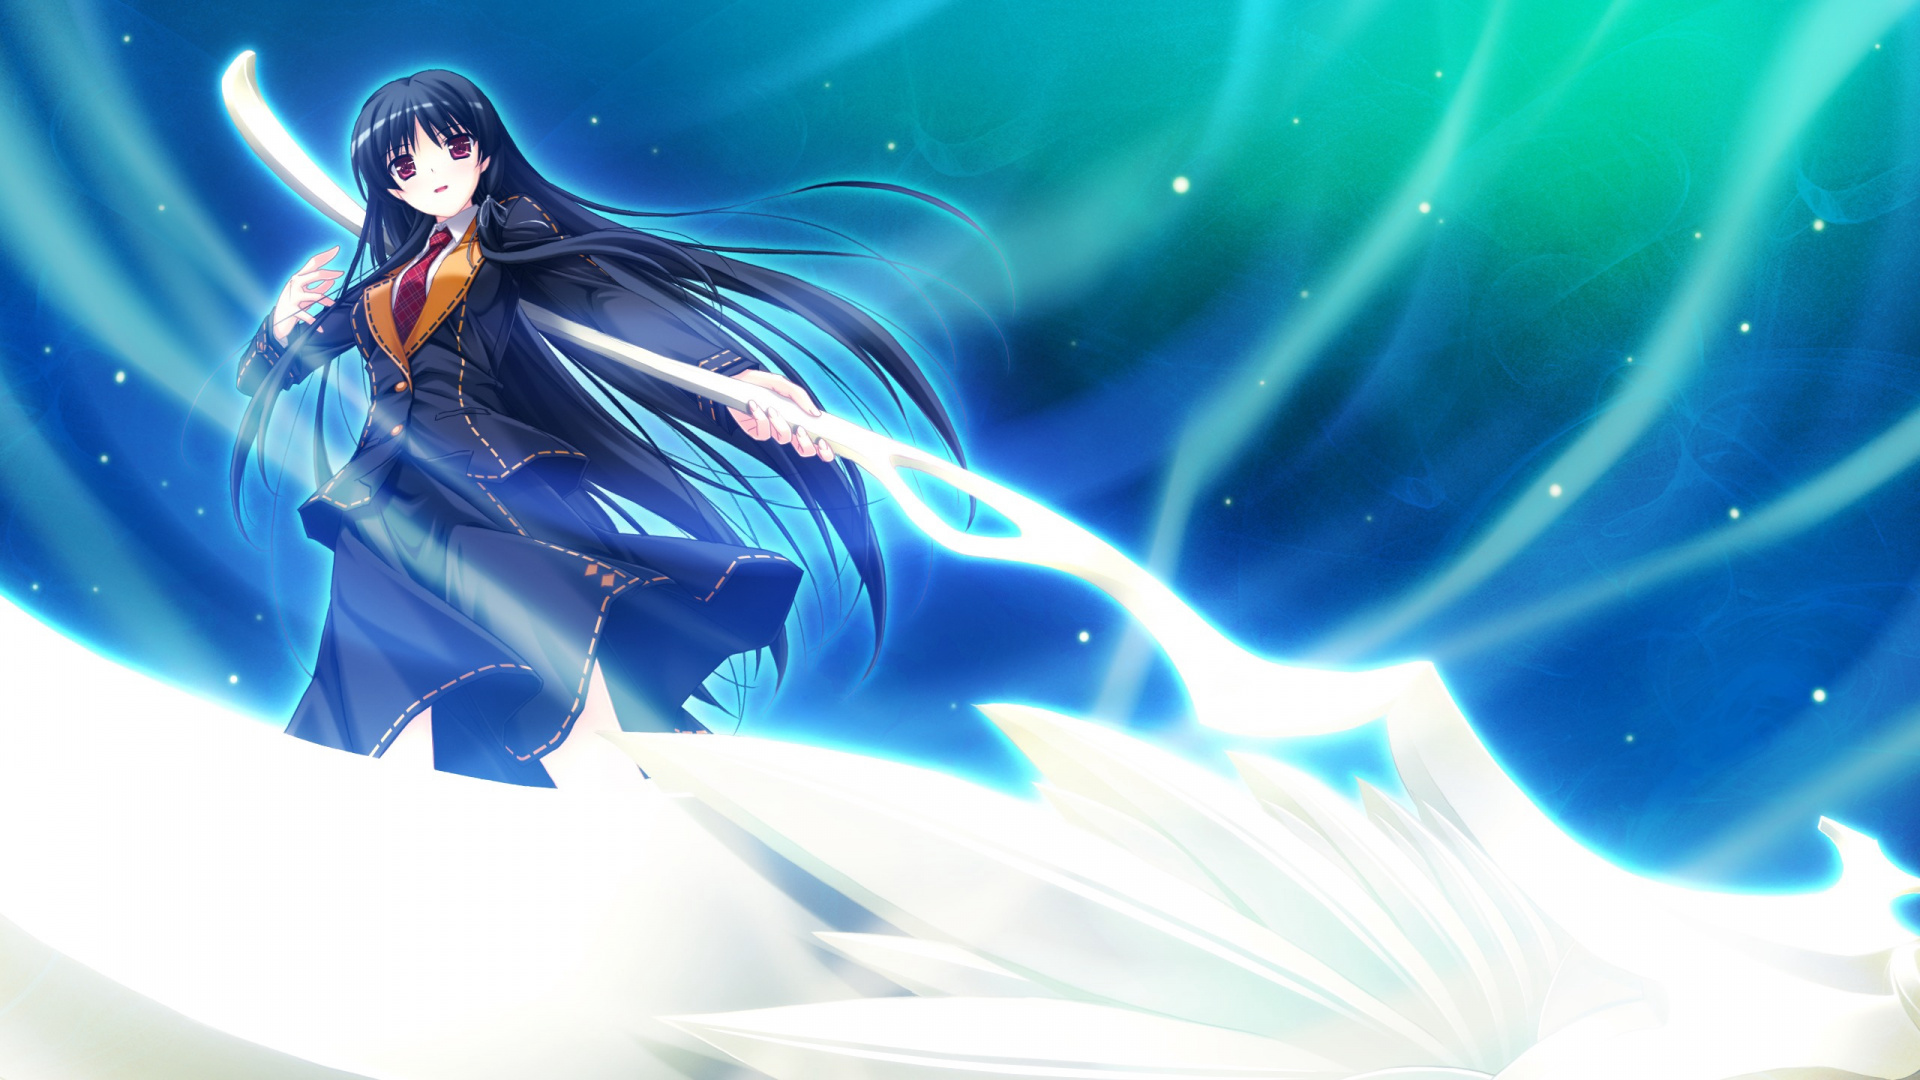 Femme en Robe Bleue Personnage Anime. Wallpaper in 1920x1080 Resolution